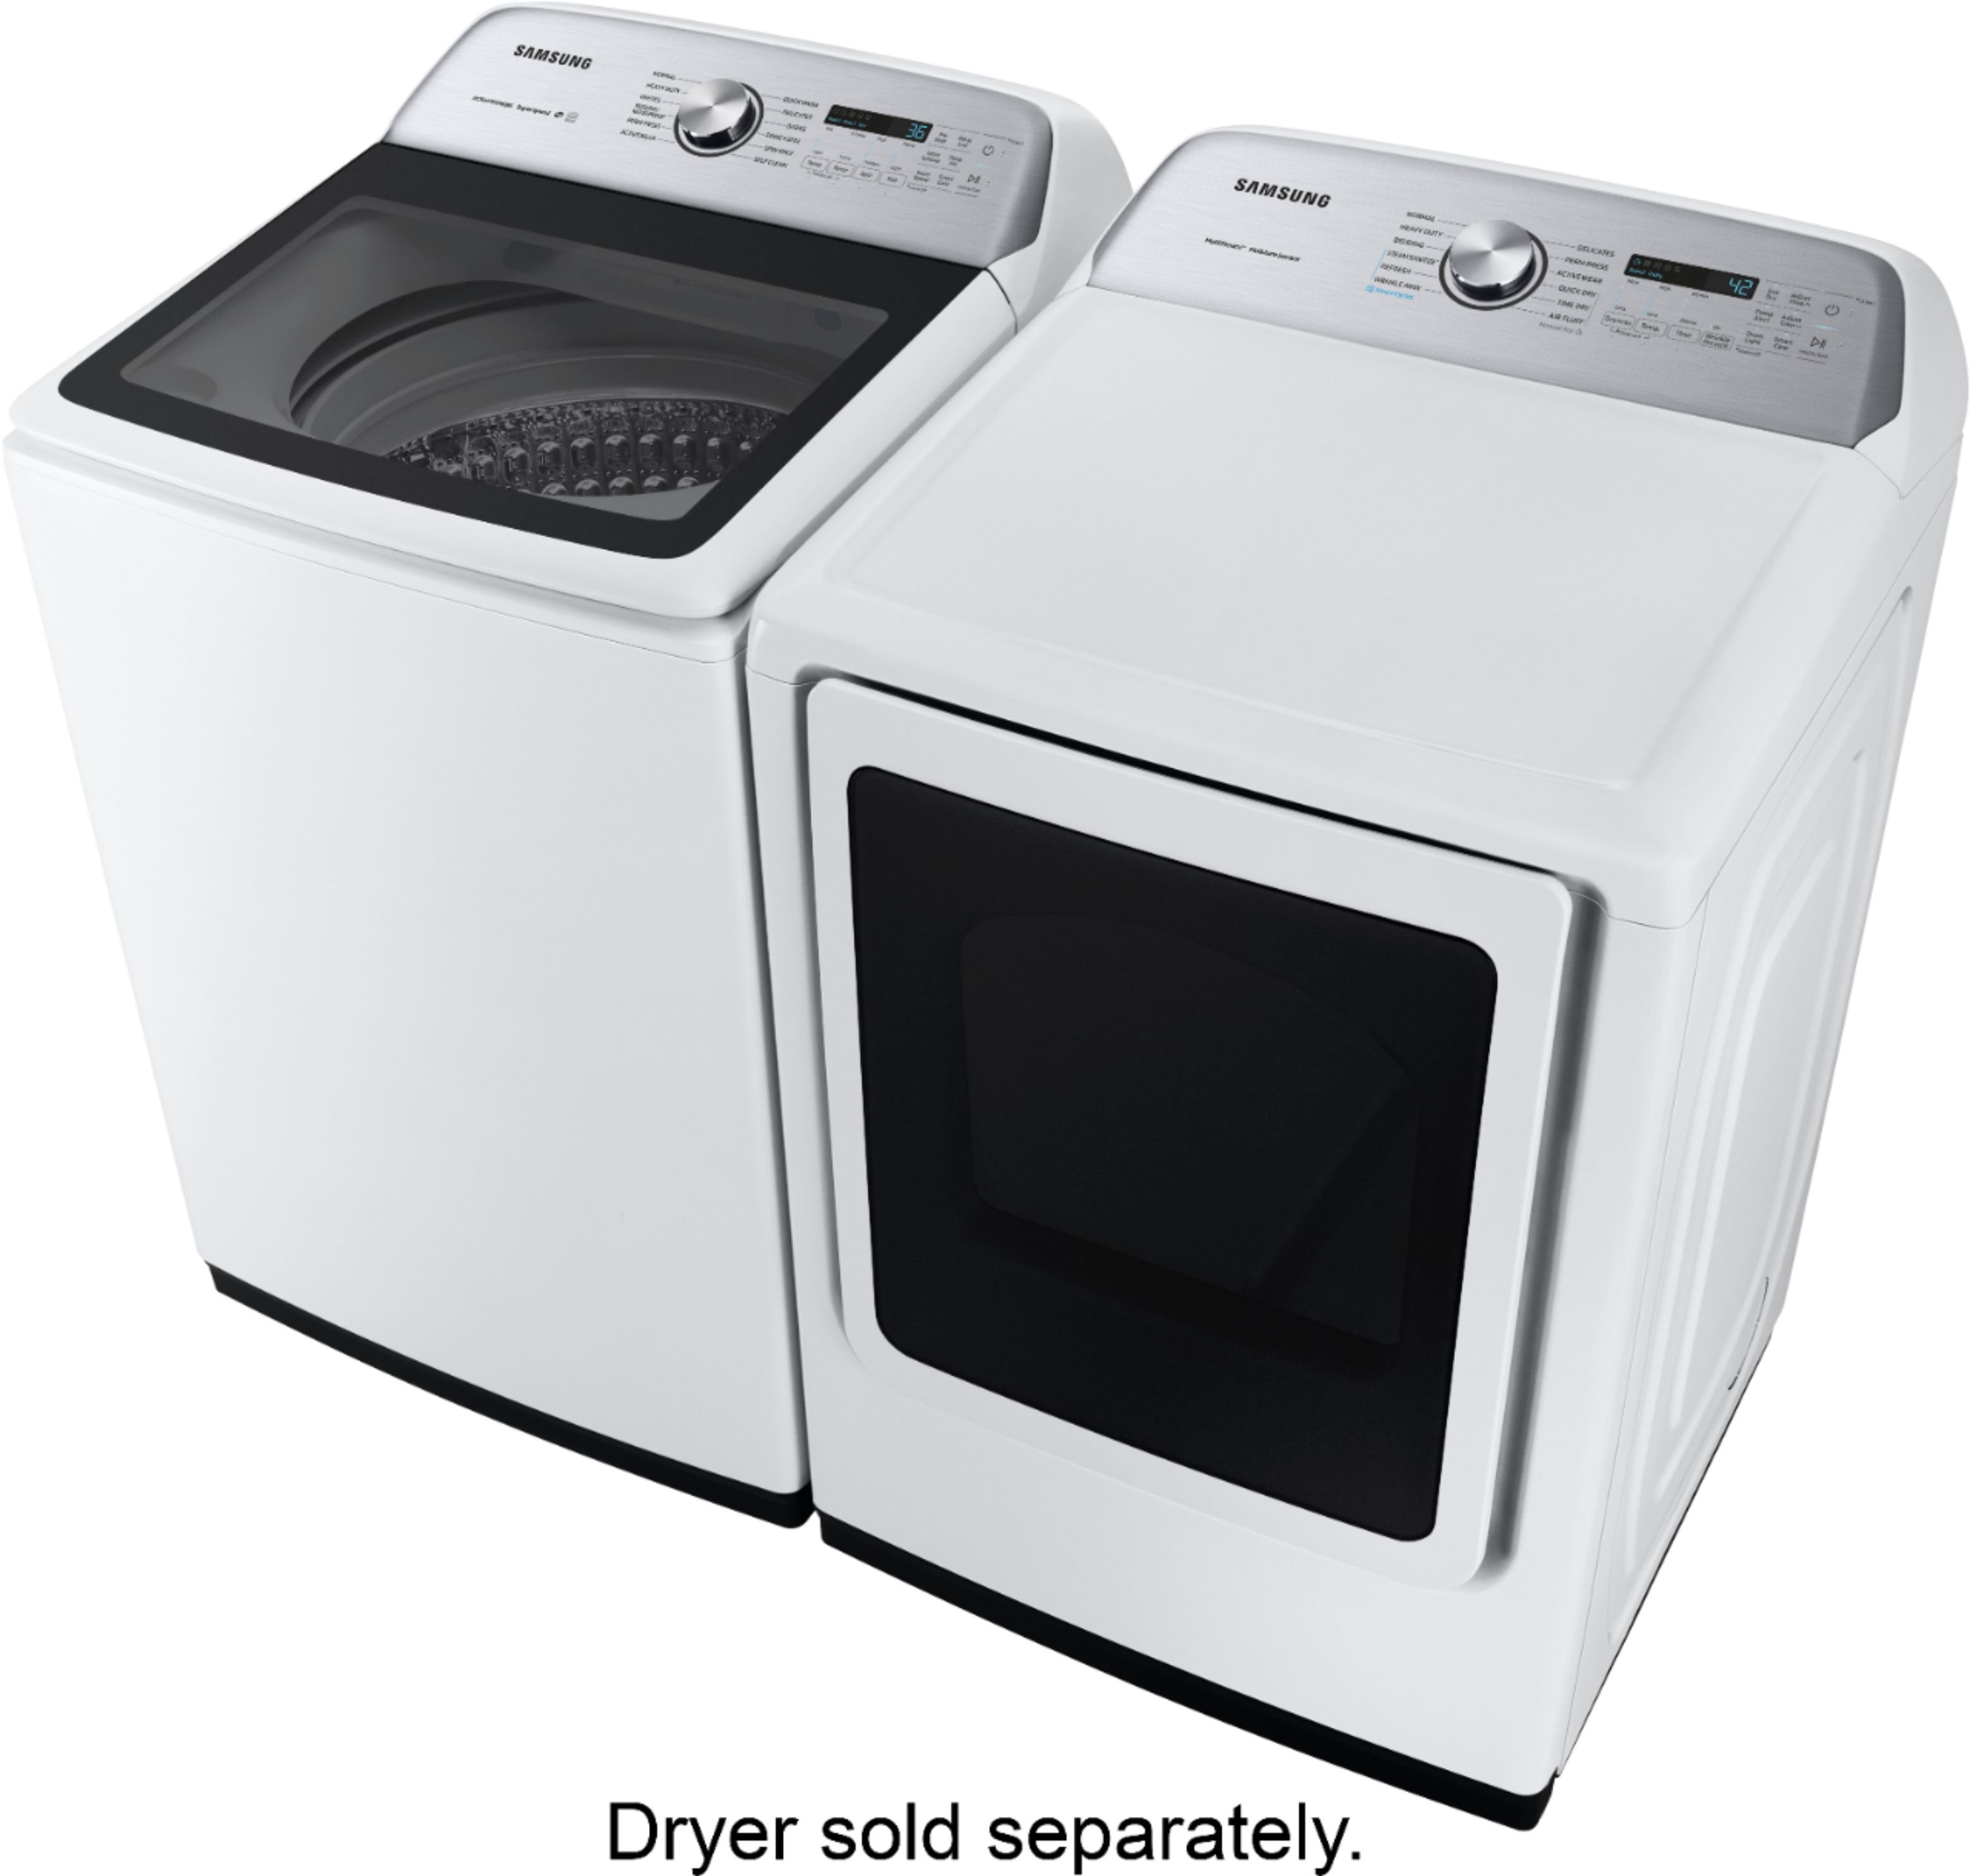 Samsung 5.0 Cu. Ft. High-Efficiency Top Load Washer with Active WaterJet  White WA50R5200AW/US - Best Buy